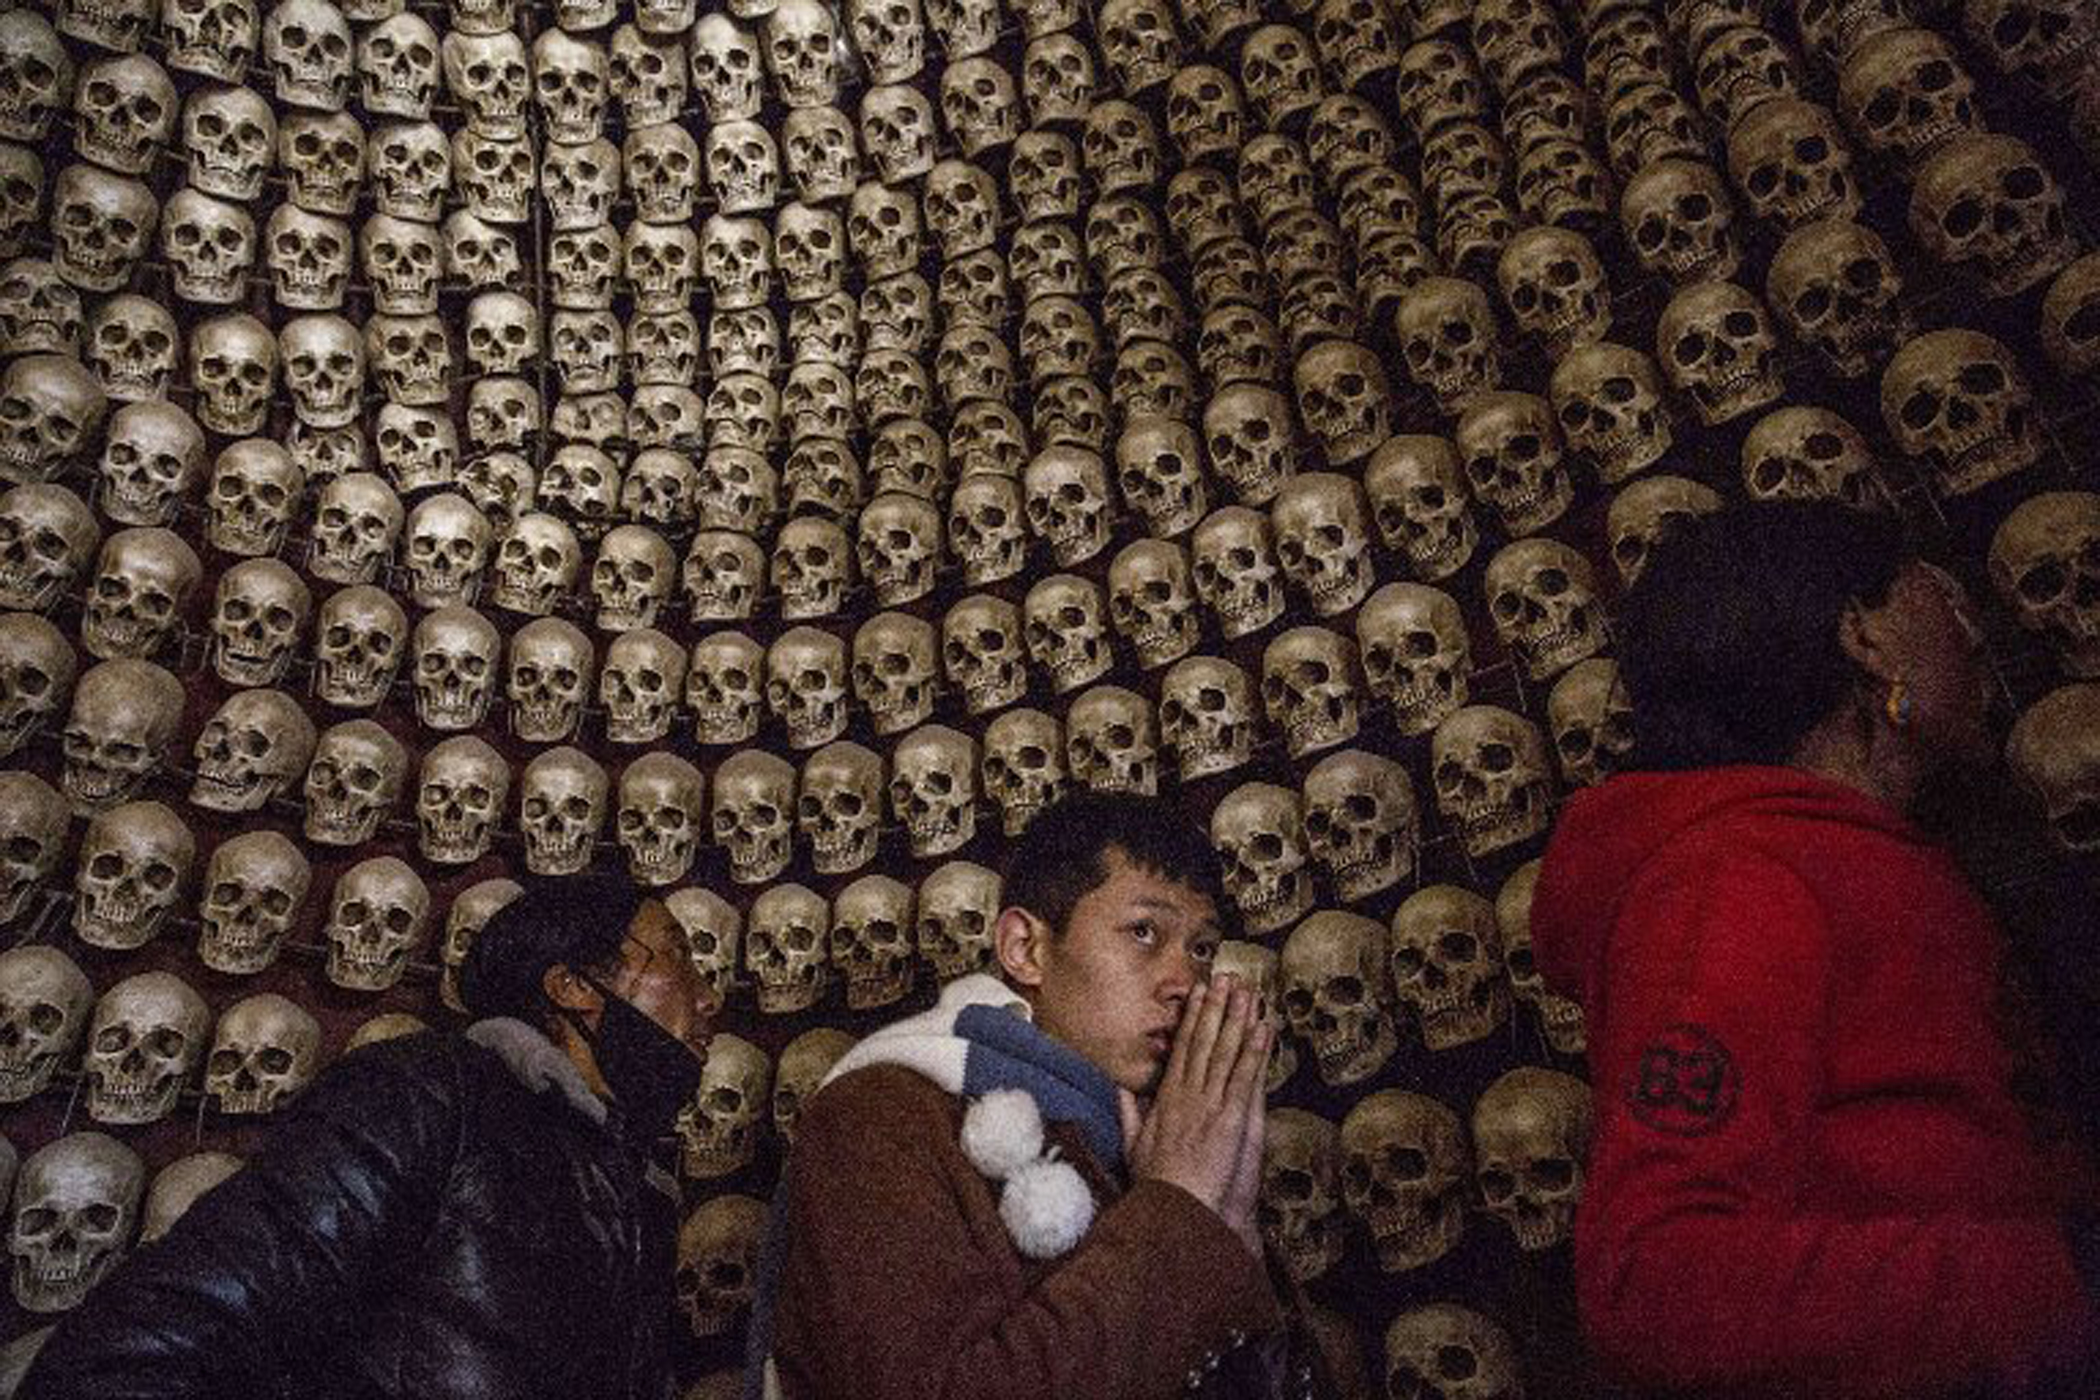 A shrine is made of fake skulls at the sky burial site near the Larung Wuming Buddhist Institute.